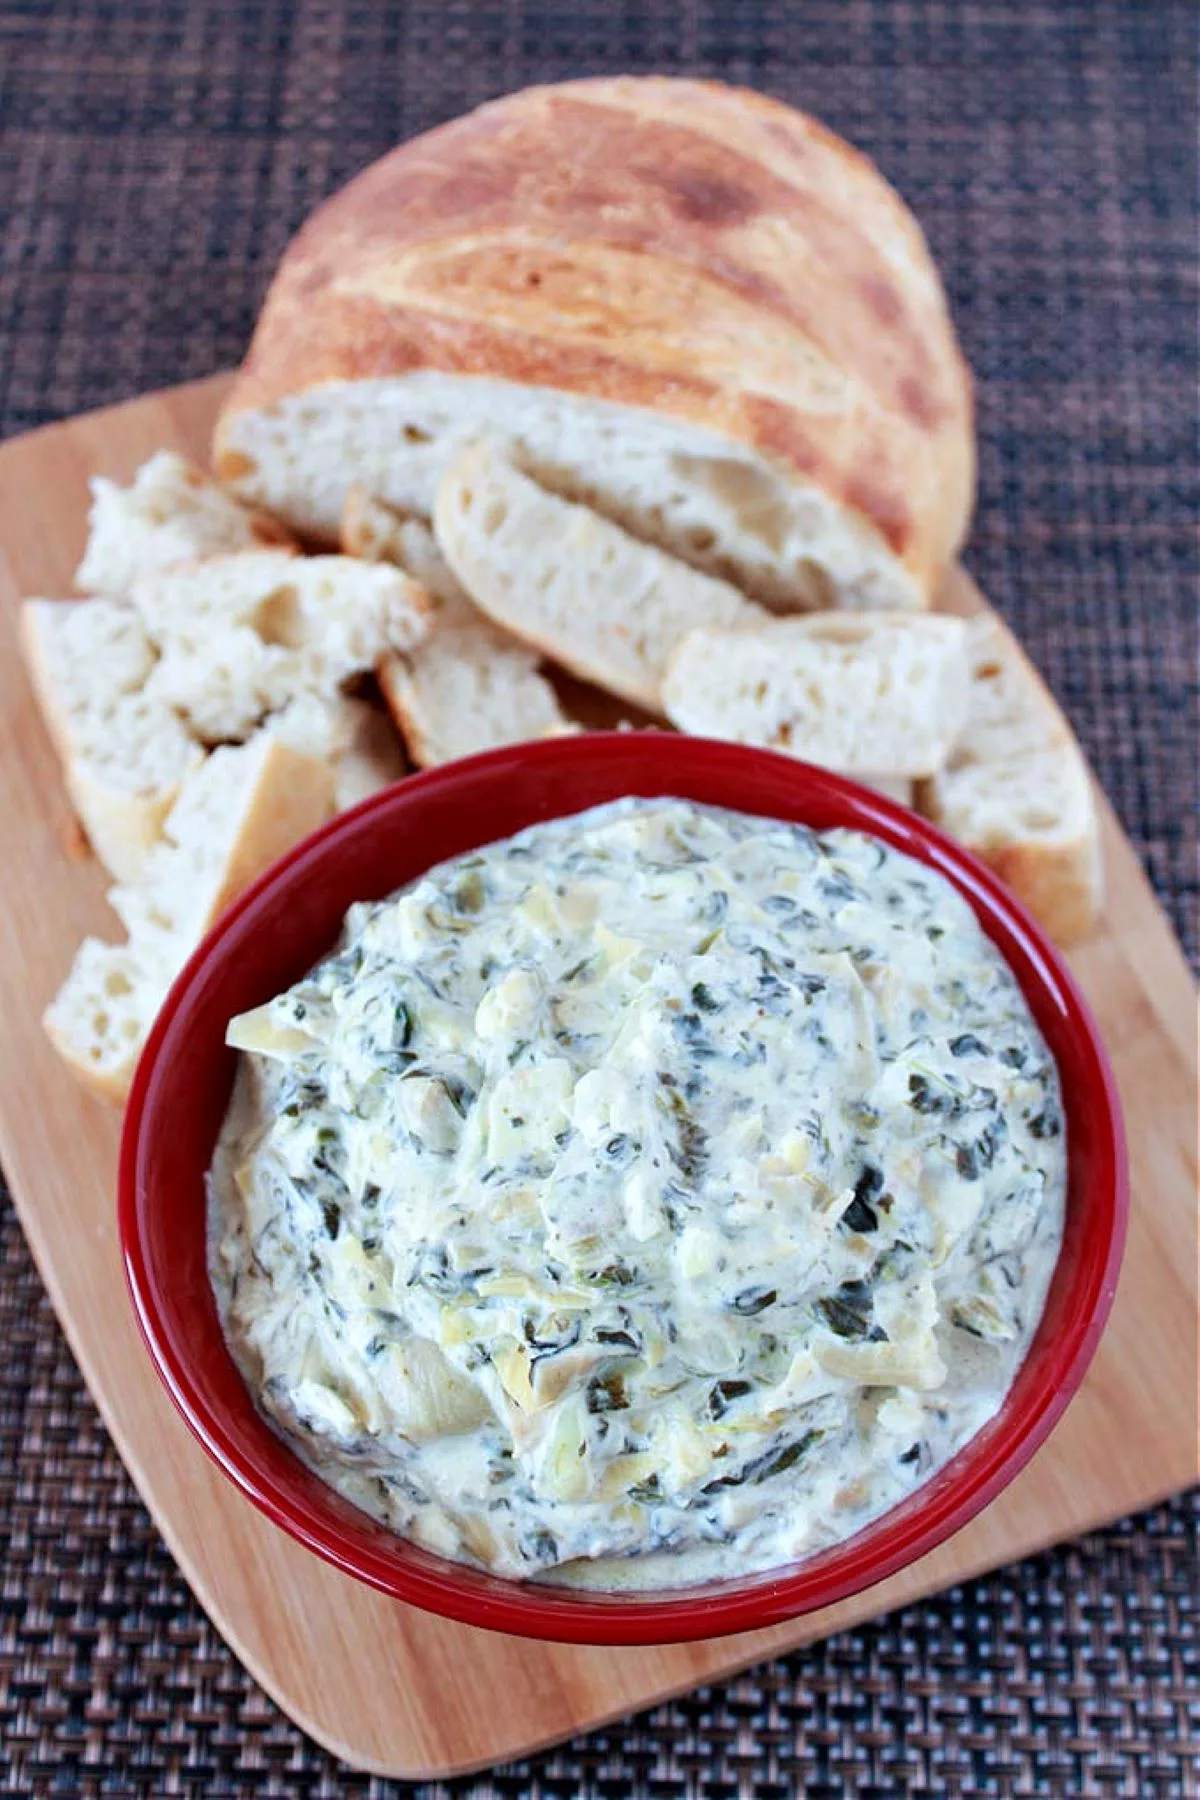 Spinach Artichoke Dip in a red bowl with bread